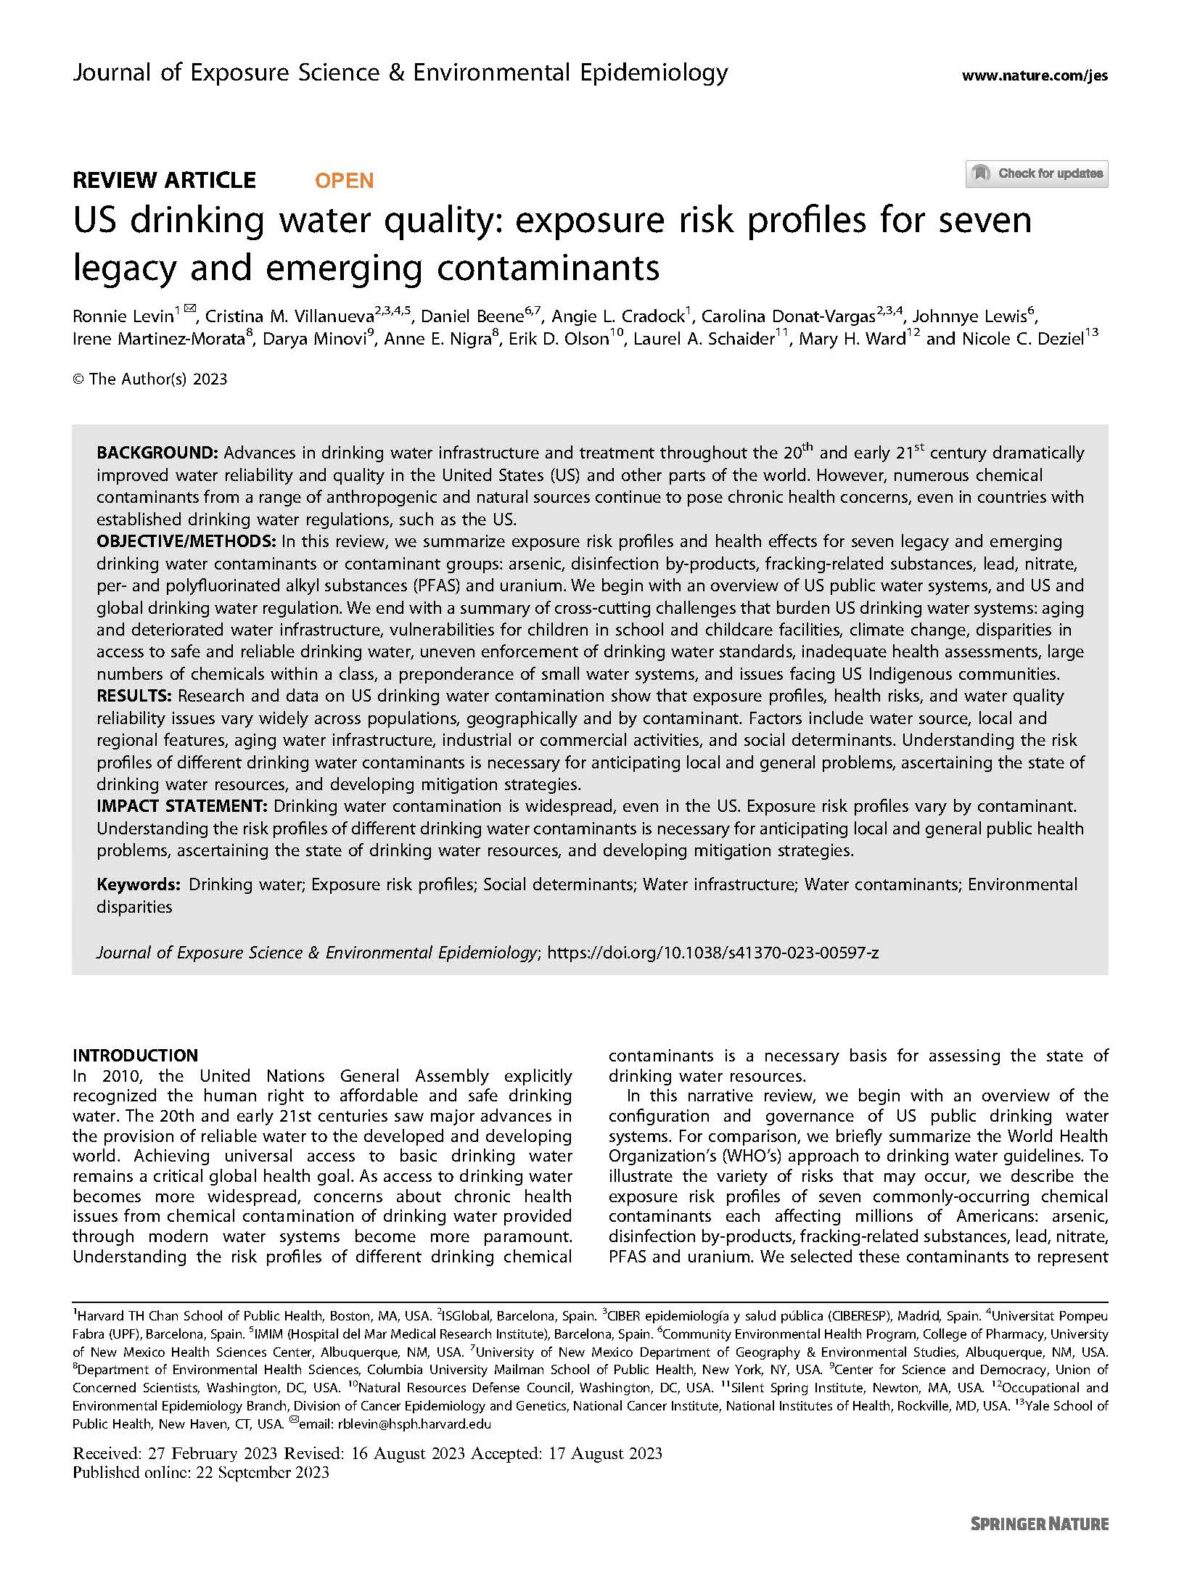 US drinking water quality: exposure risk profiles for seven legacy and emerging contaminants